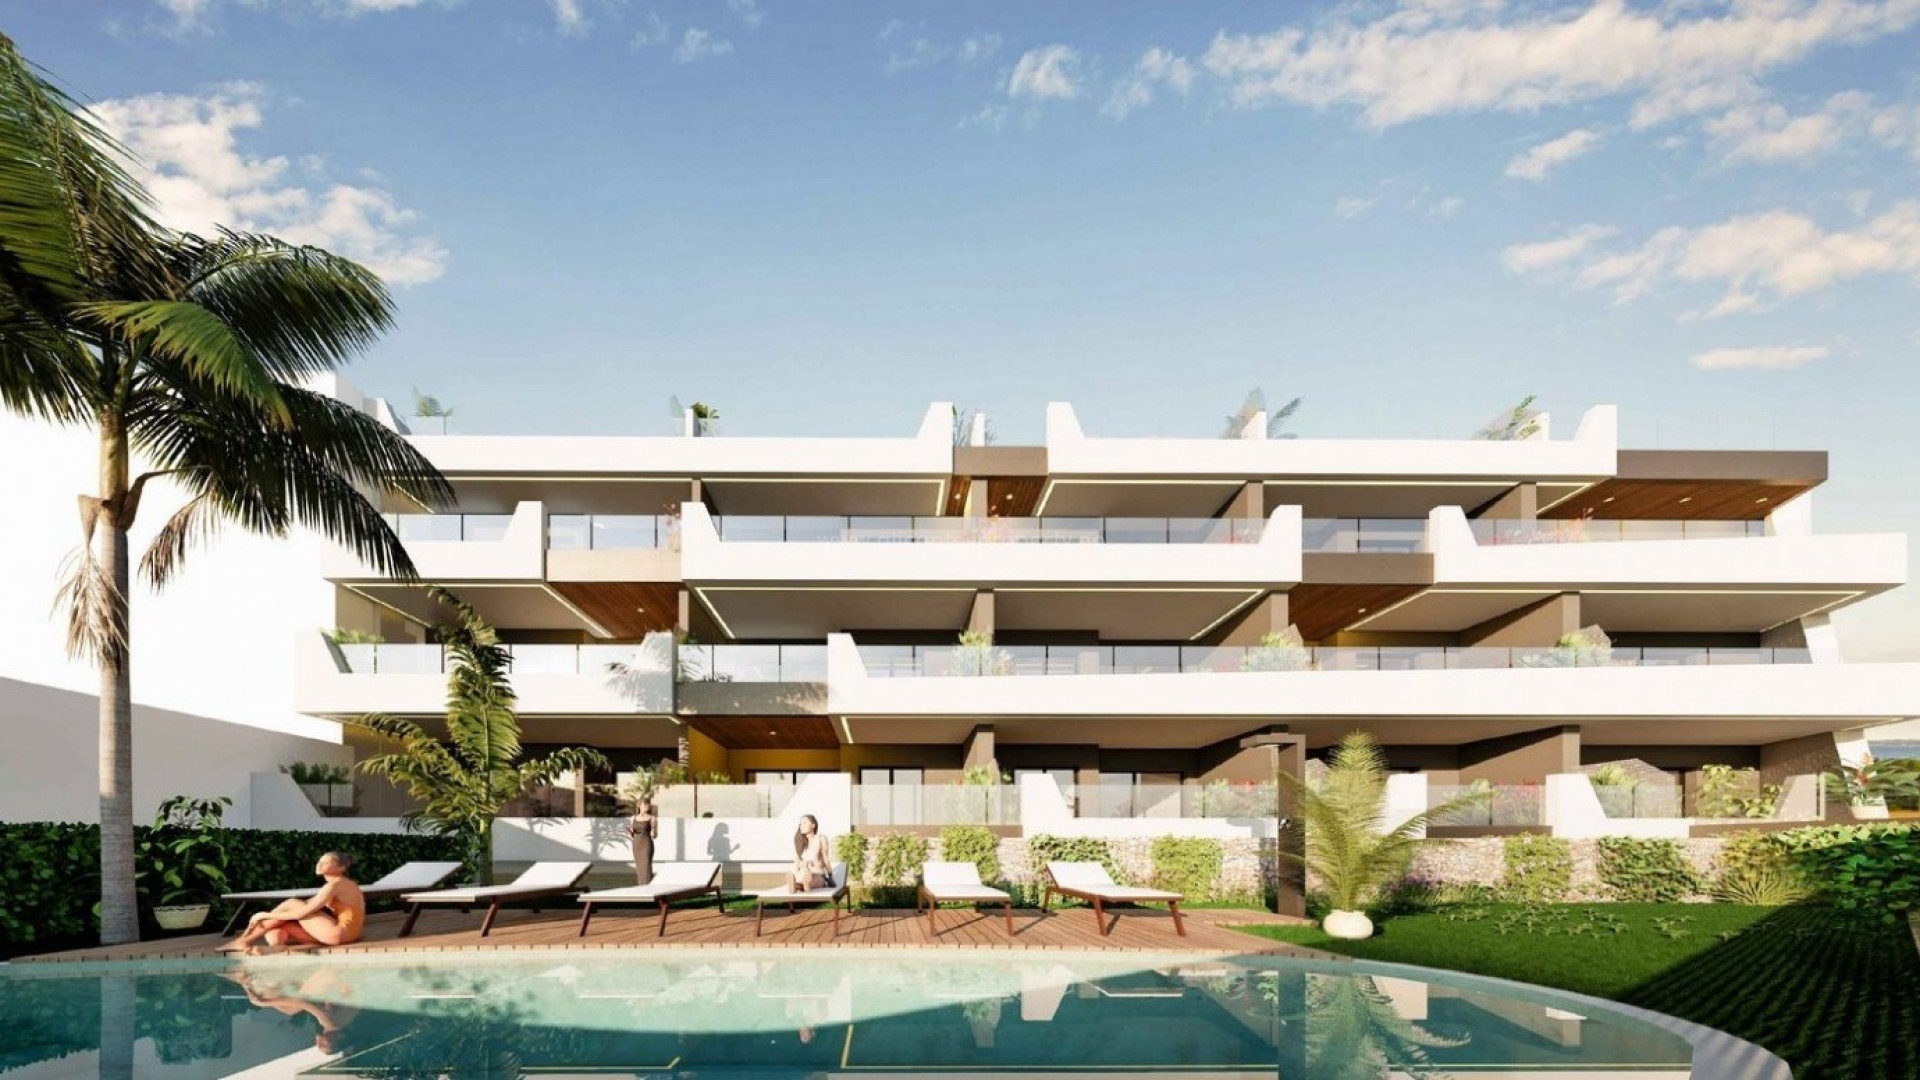 New apartments in Benijofar, Alicante, 2/3 bedrooms and 2 bathrooms, green area w/swimming pool. Several golf courses nearby. 10 min to beaches